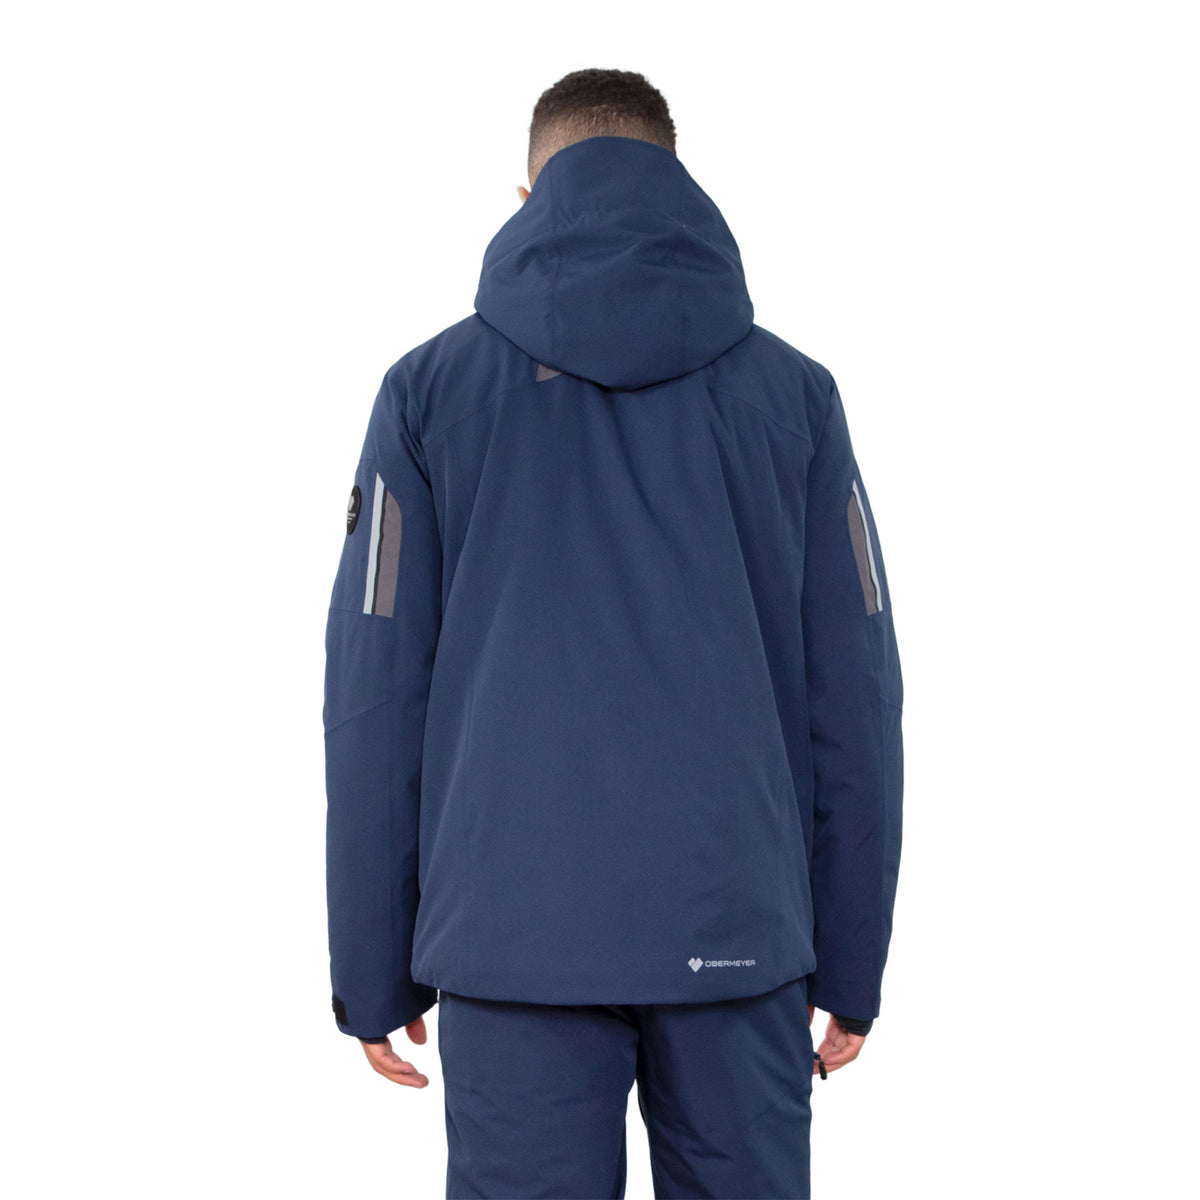 Image features the back of a male model wearing the Obermeyer Primo Jacket in admiral blue with navy blue ski pants.